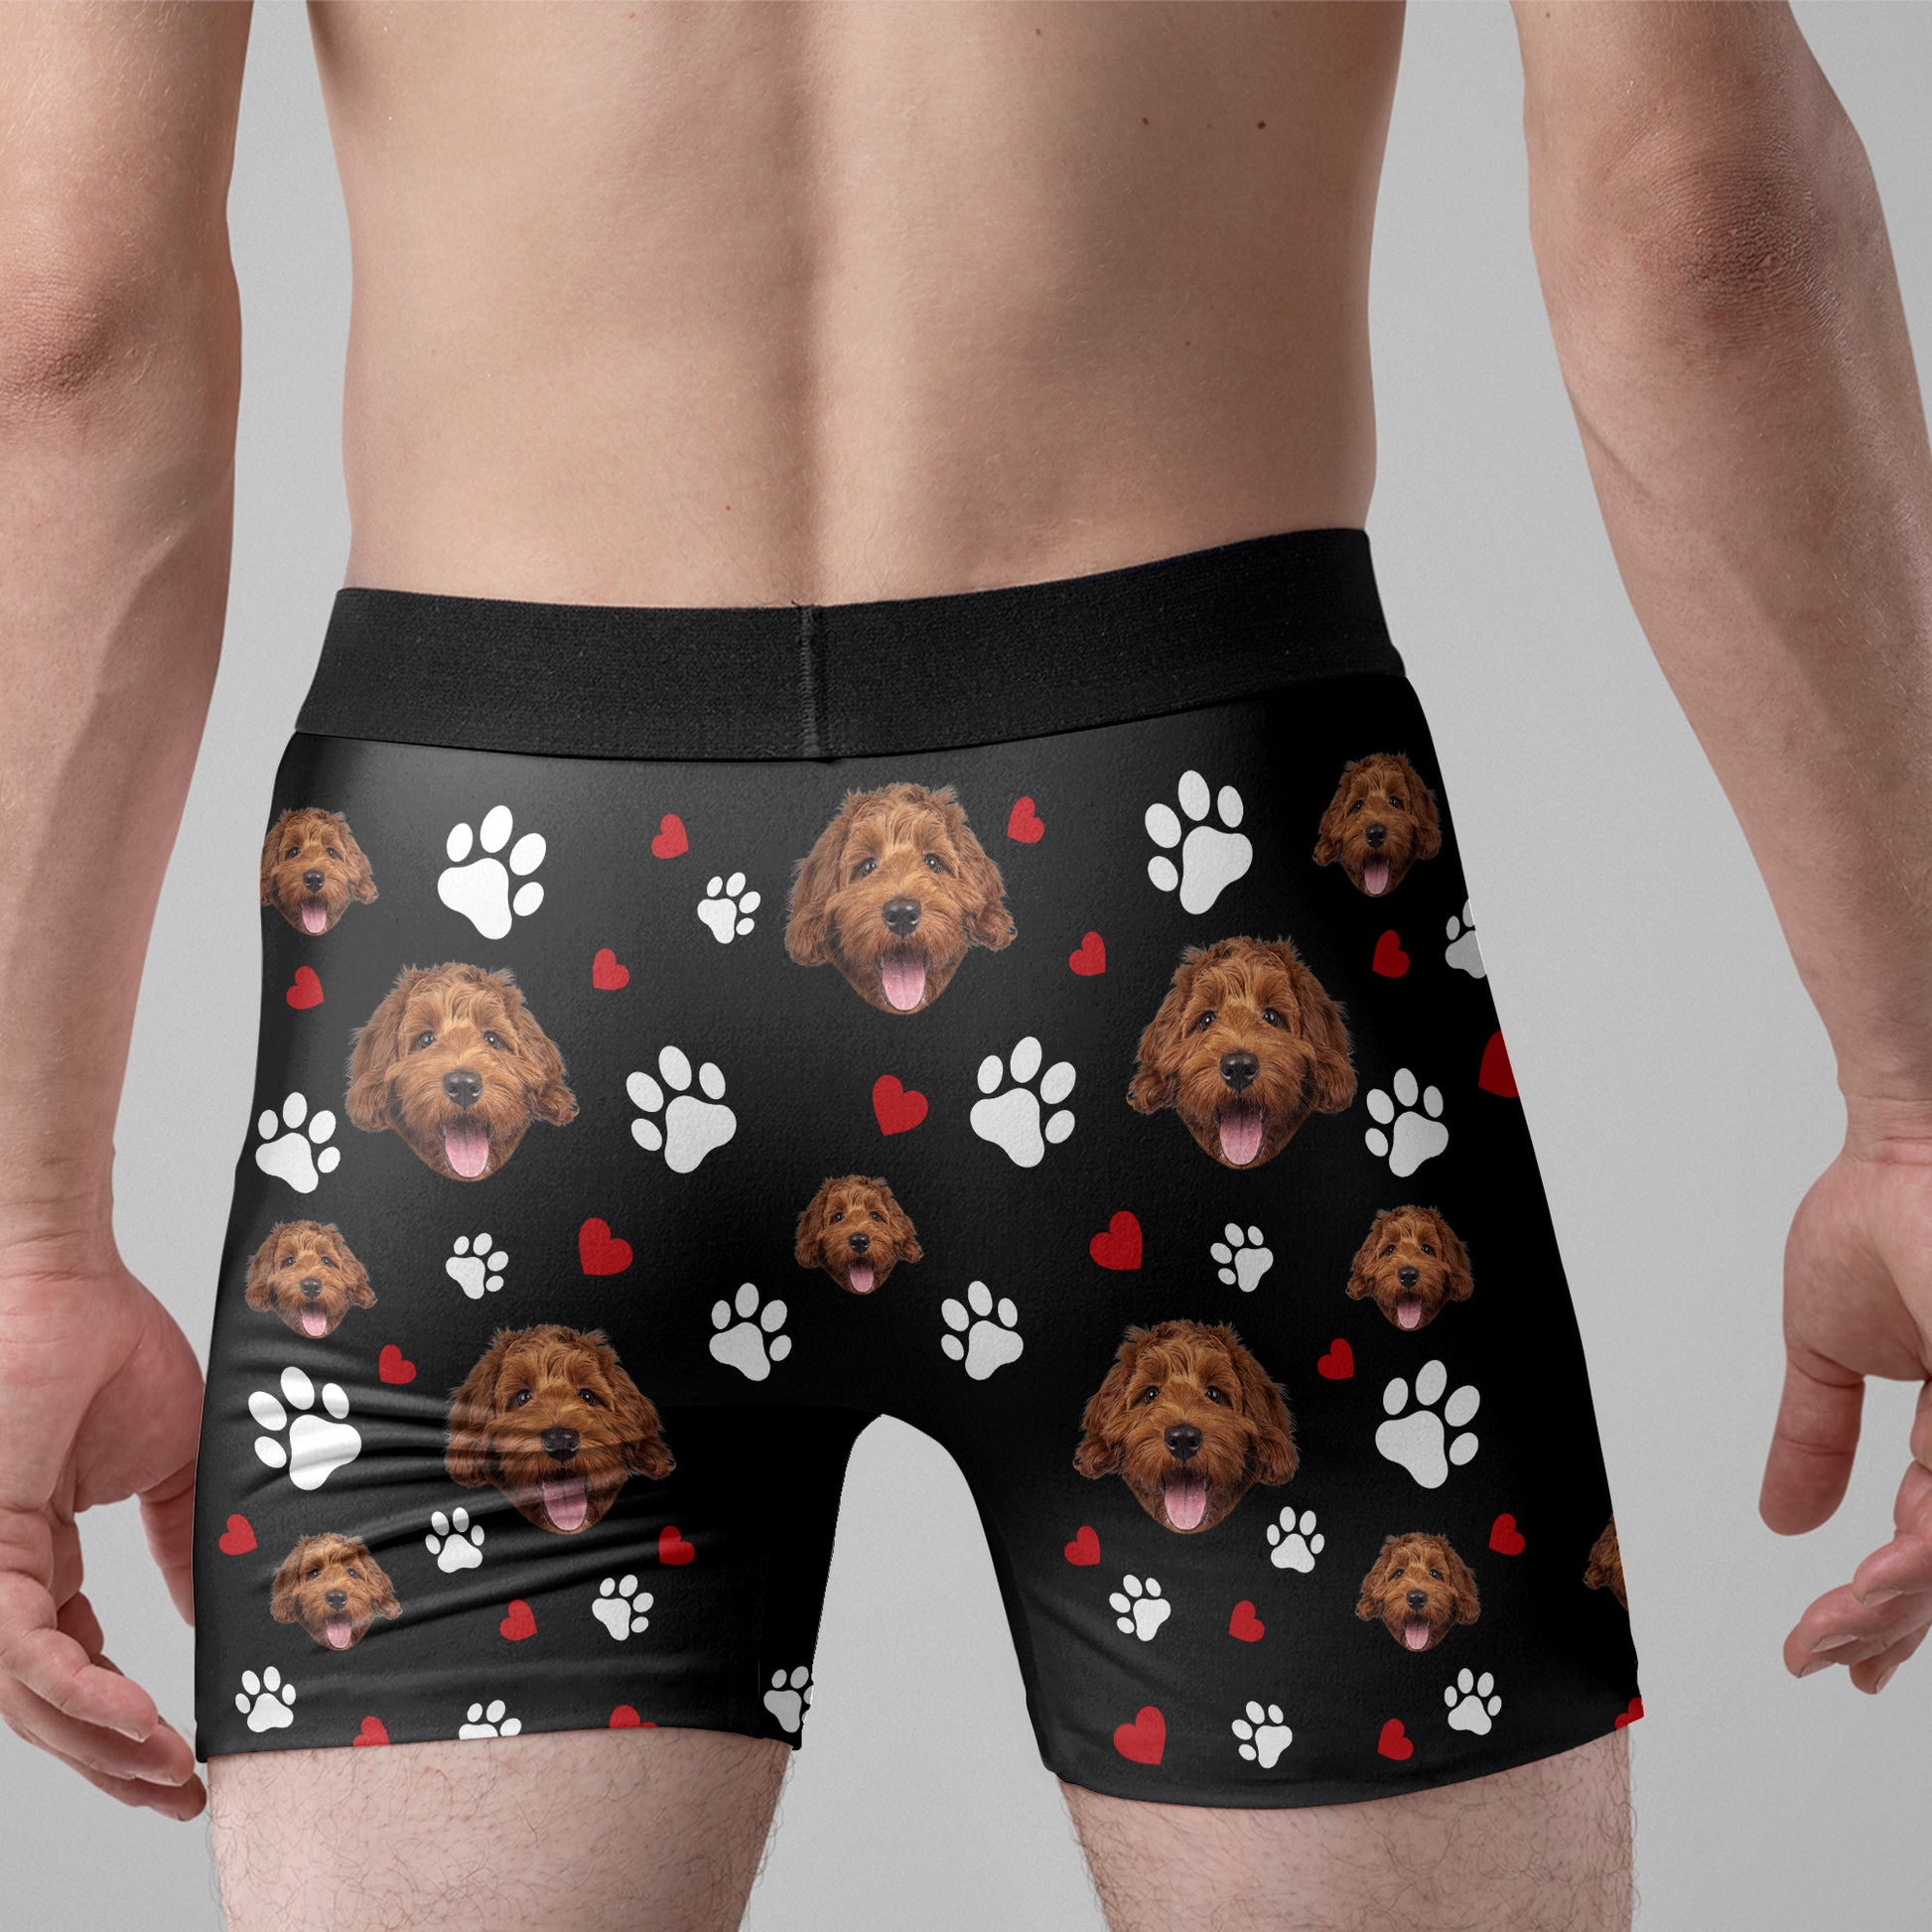 Custom Boxers With Pet Face Photo - Personalized Photo Men's Boxer